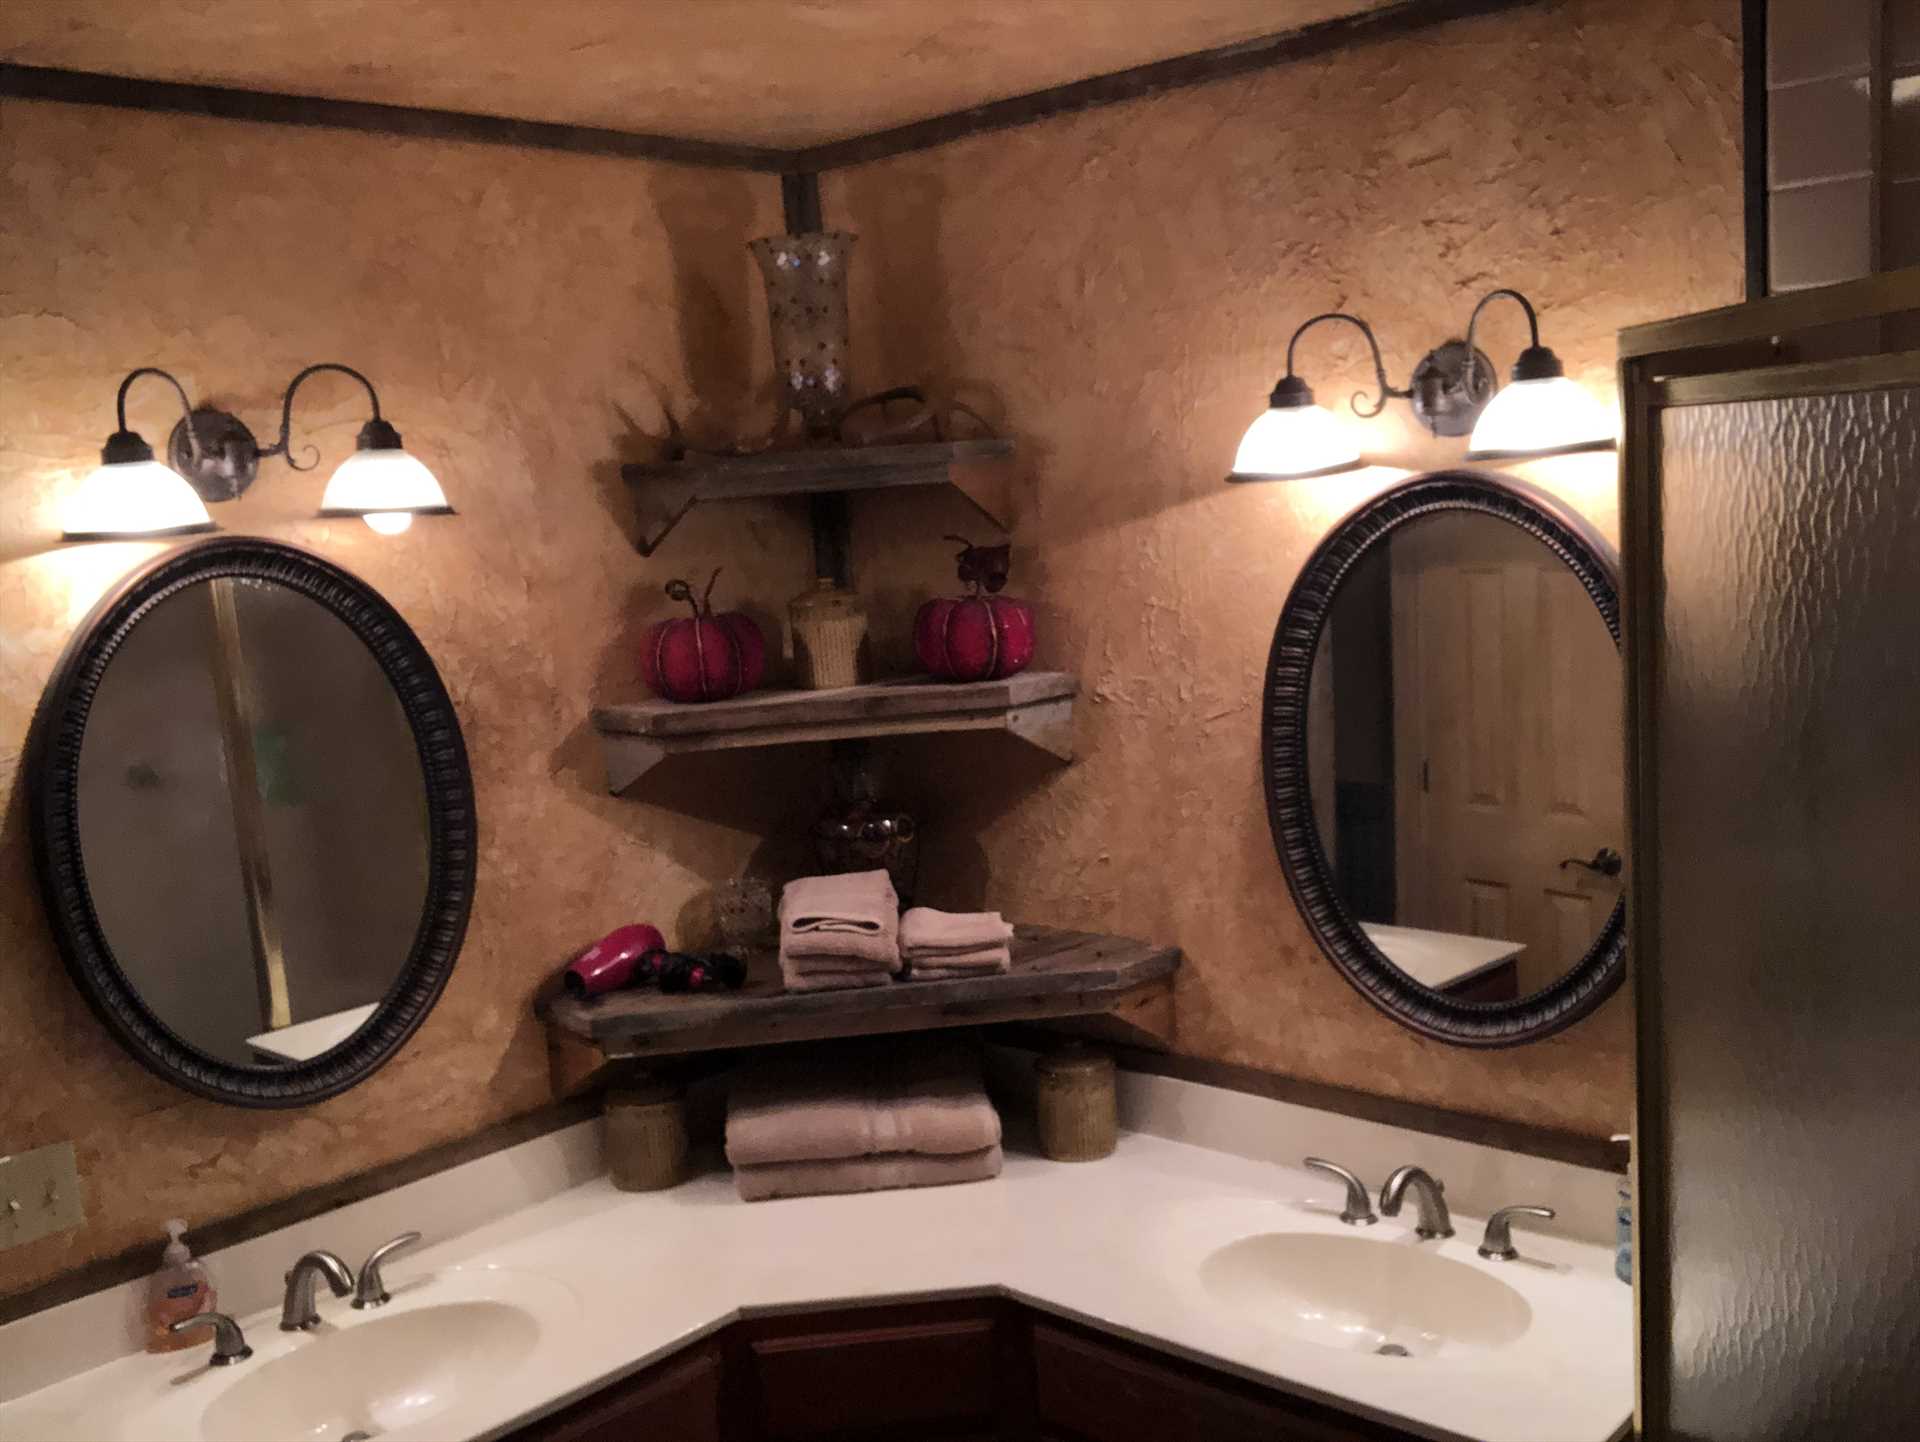                                                 Twin vanities and a roomy shower stall round out a master bedroom fit for royalty!